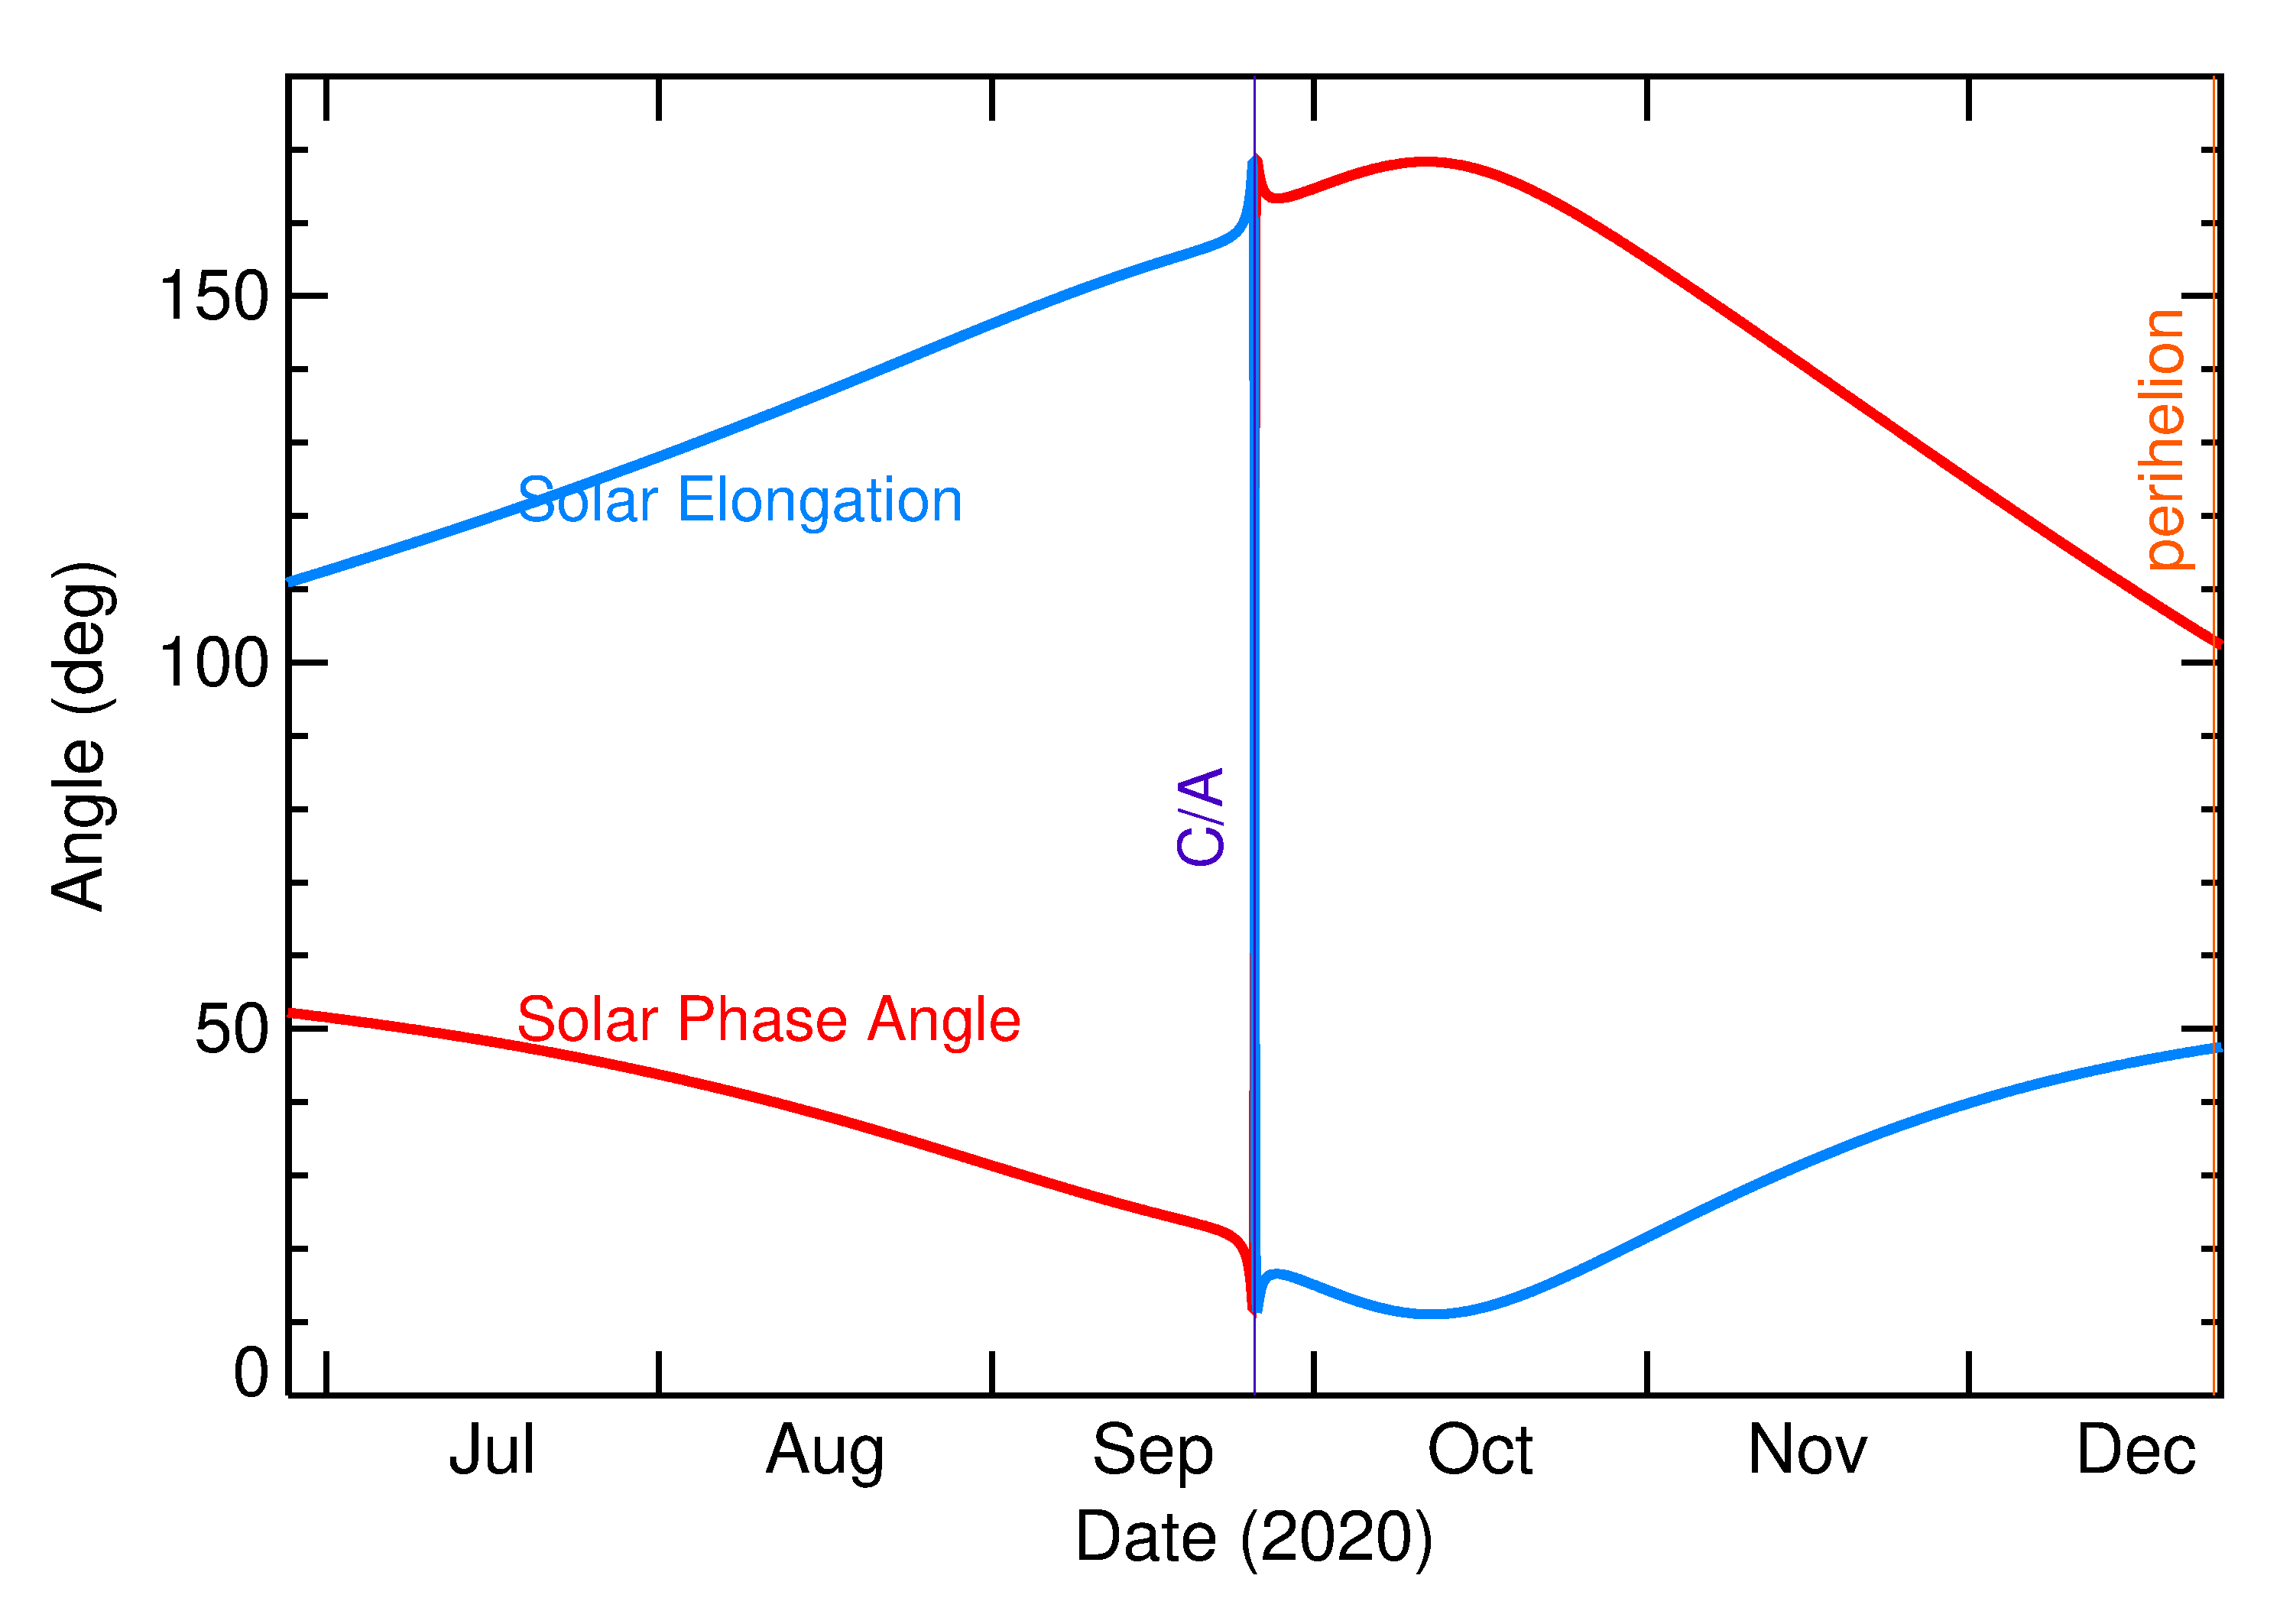 Solar Elongation and Solar Phase Angle of 2020 SW in the months around closest approach